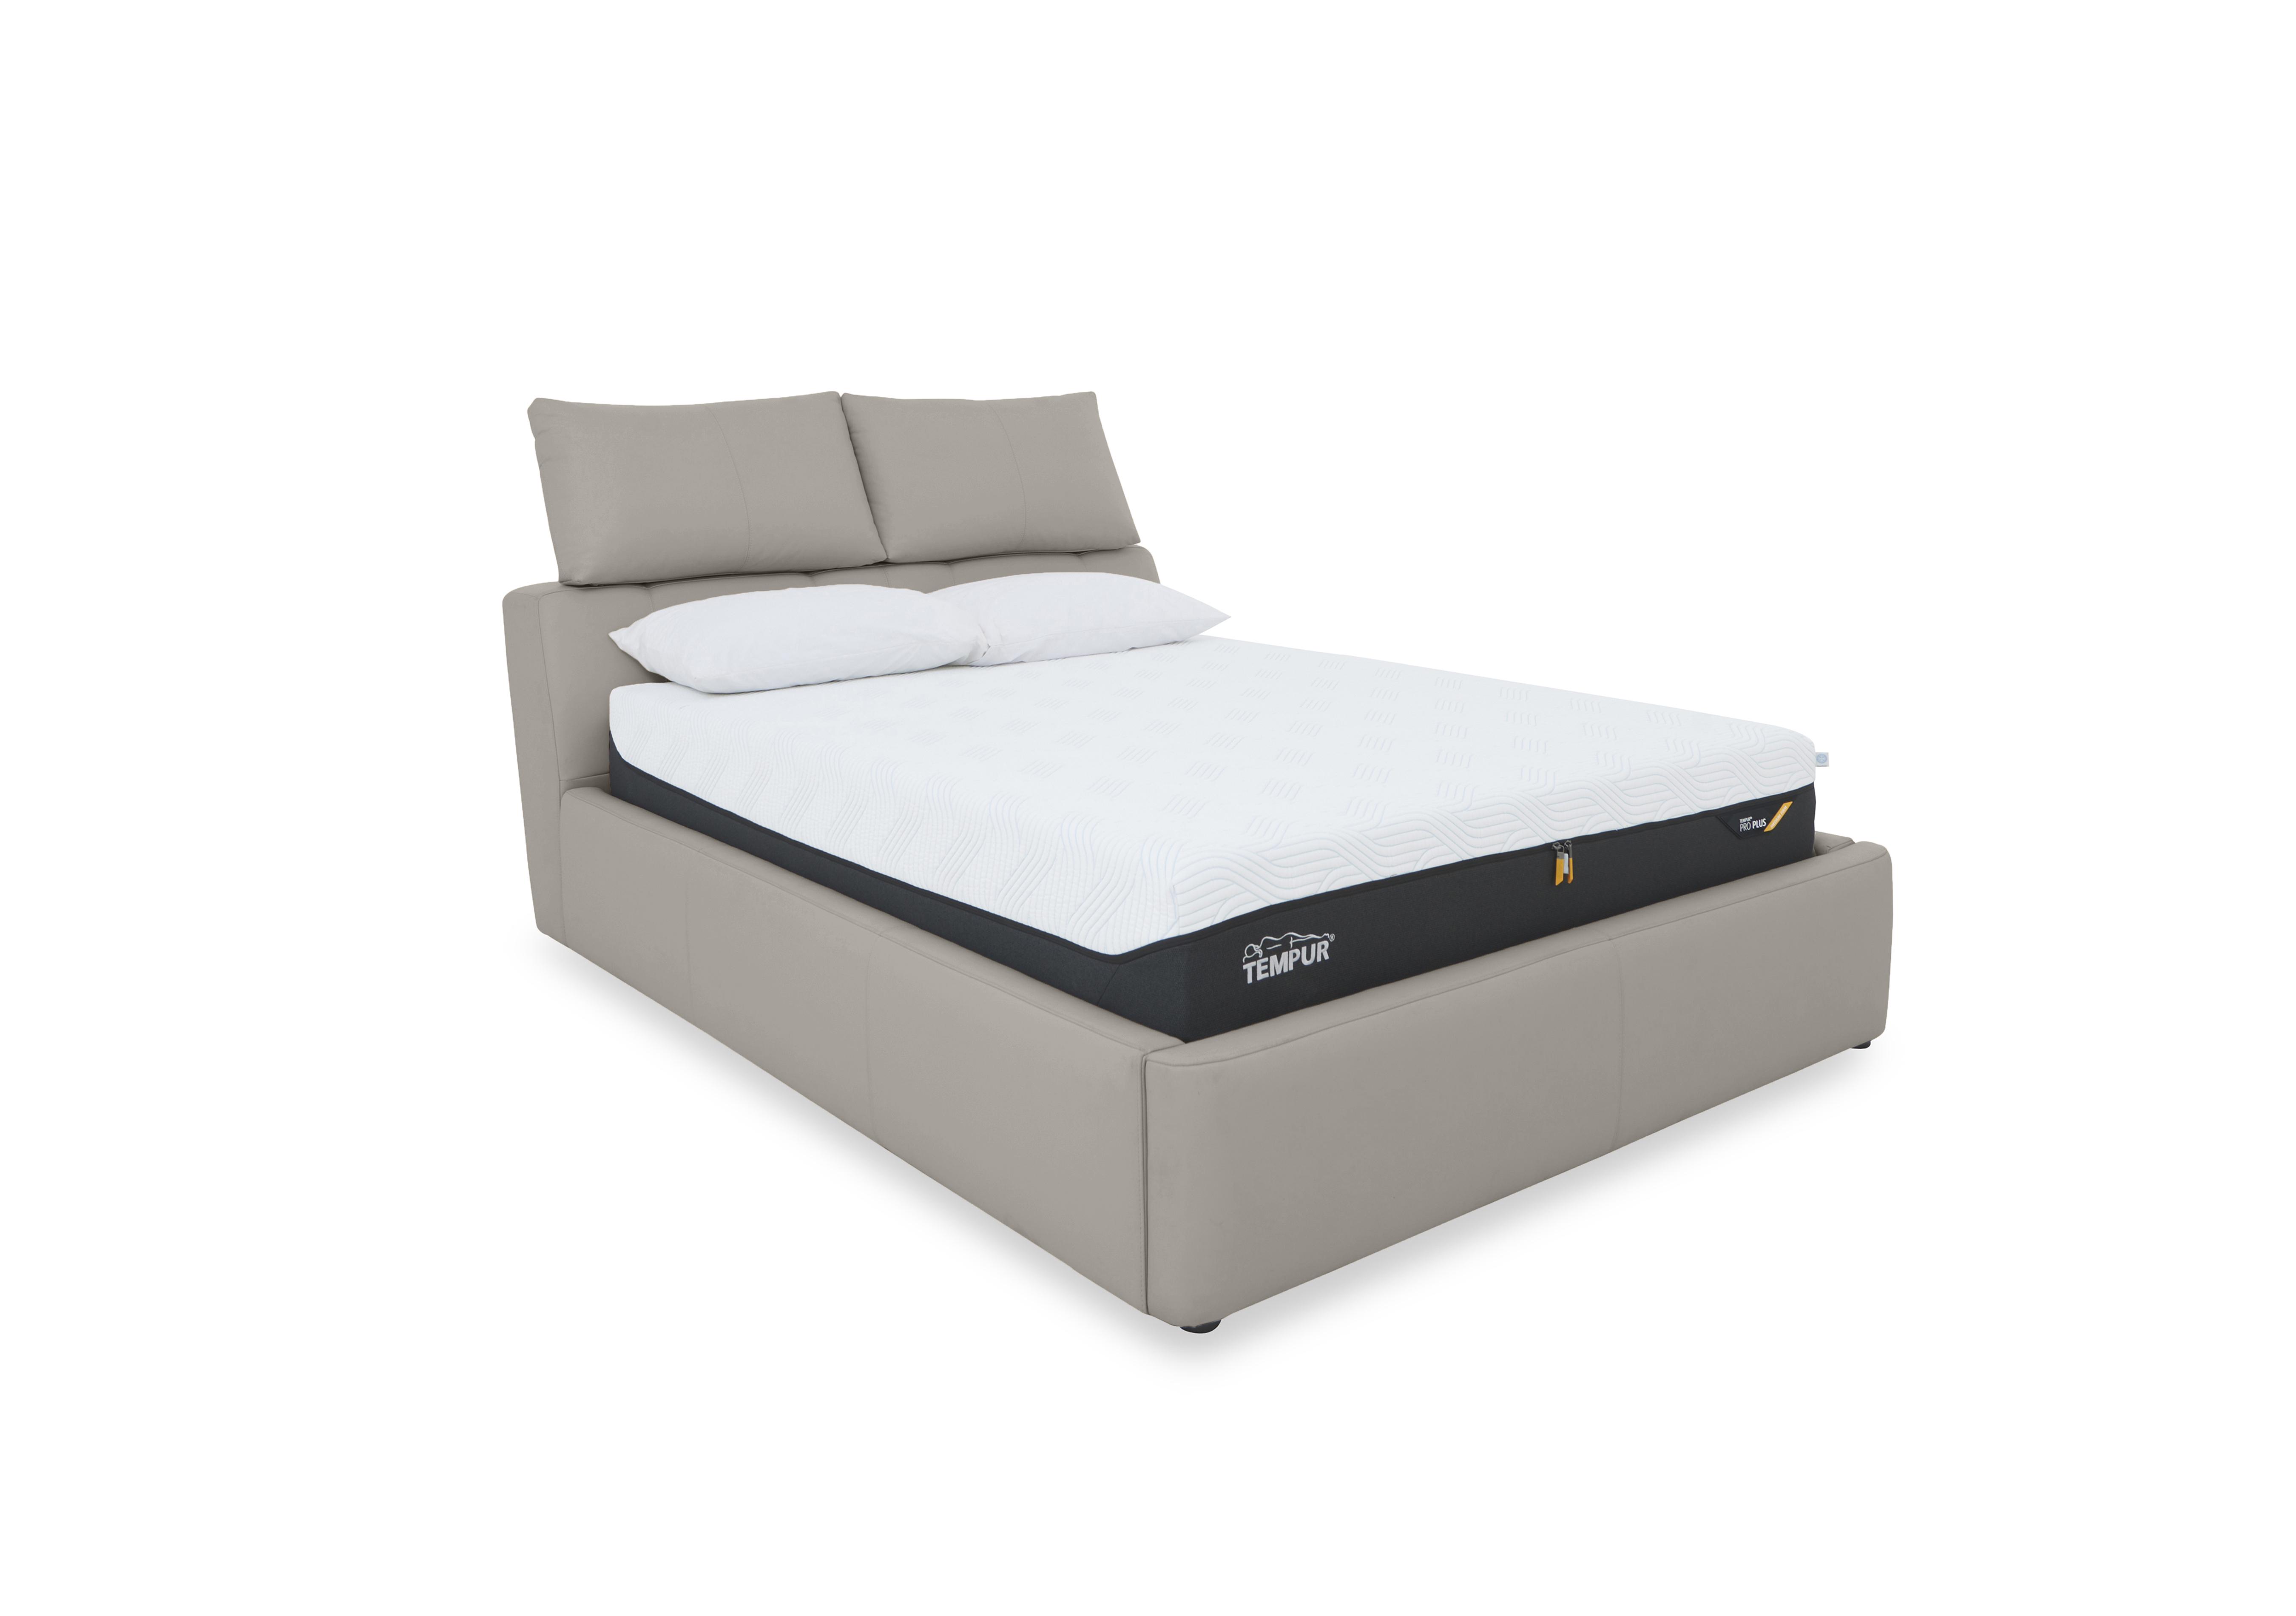 Tyrell Leather Manual Ottoman Bed Frame in Bv-946b Silver Grey on Furniture Village